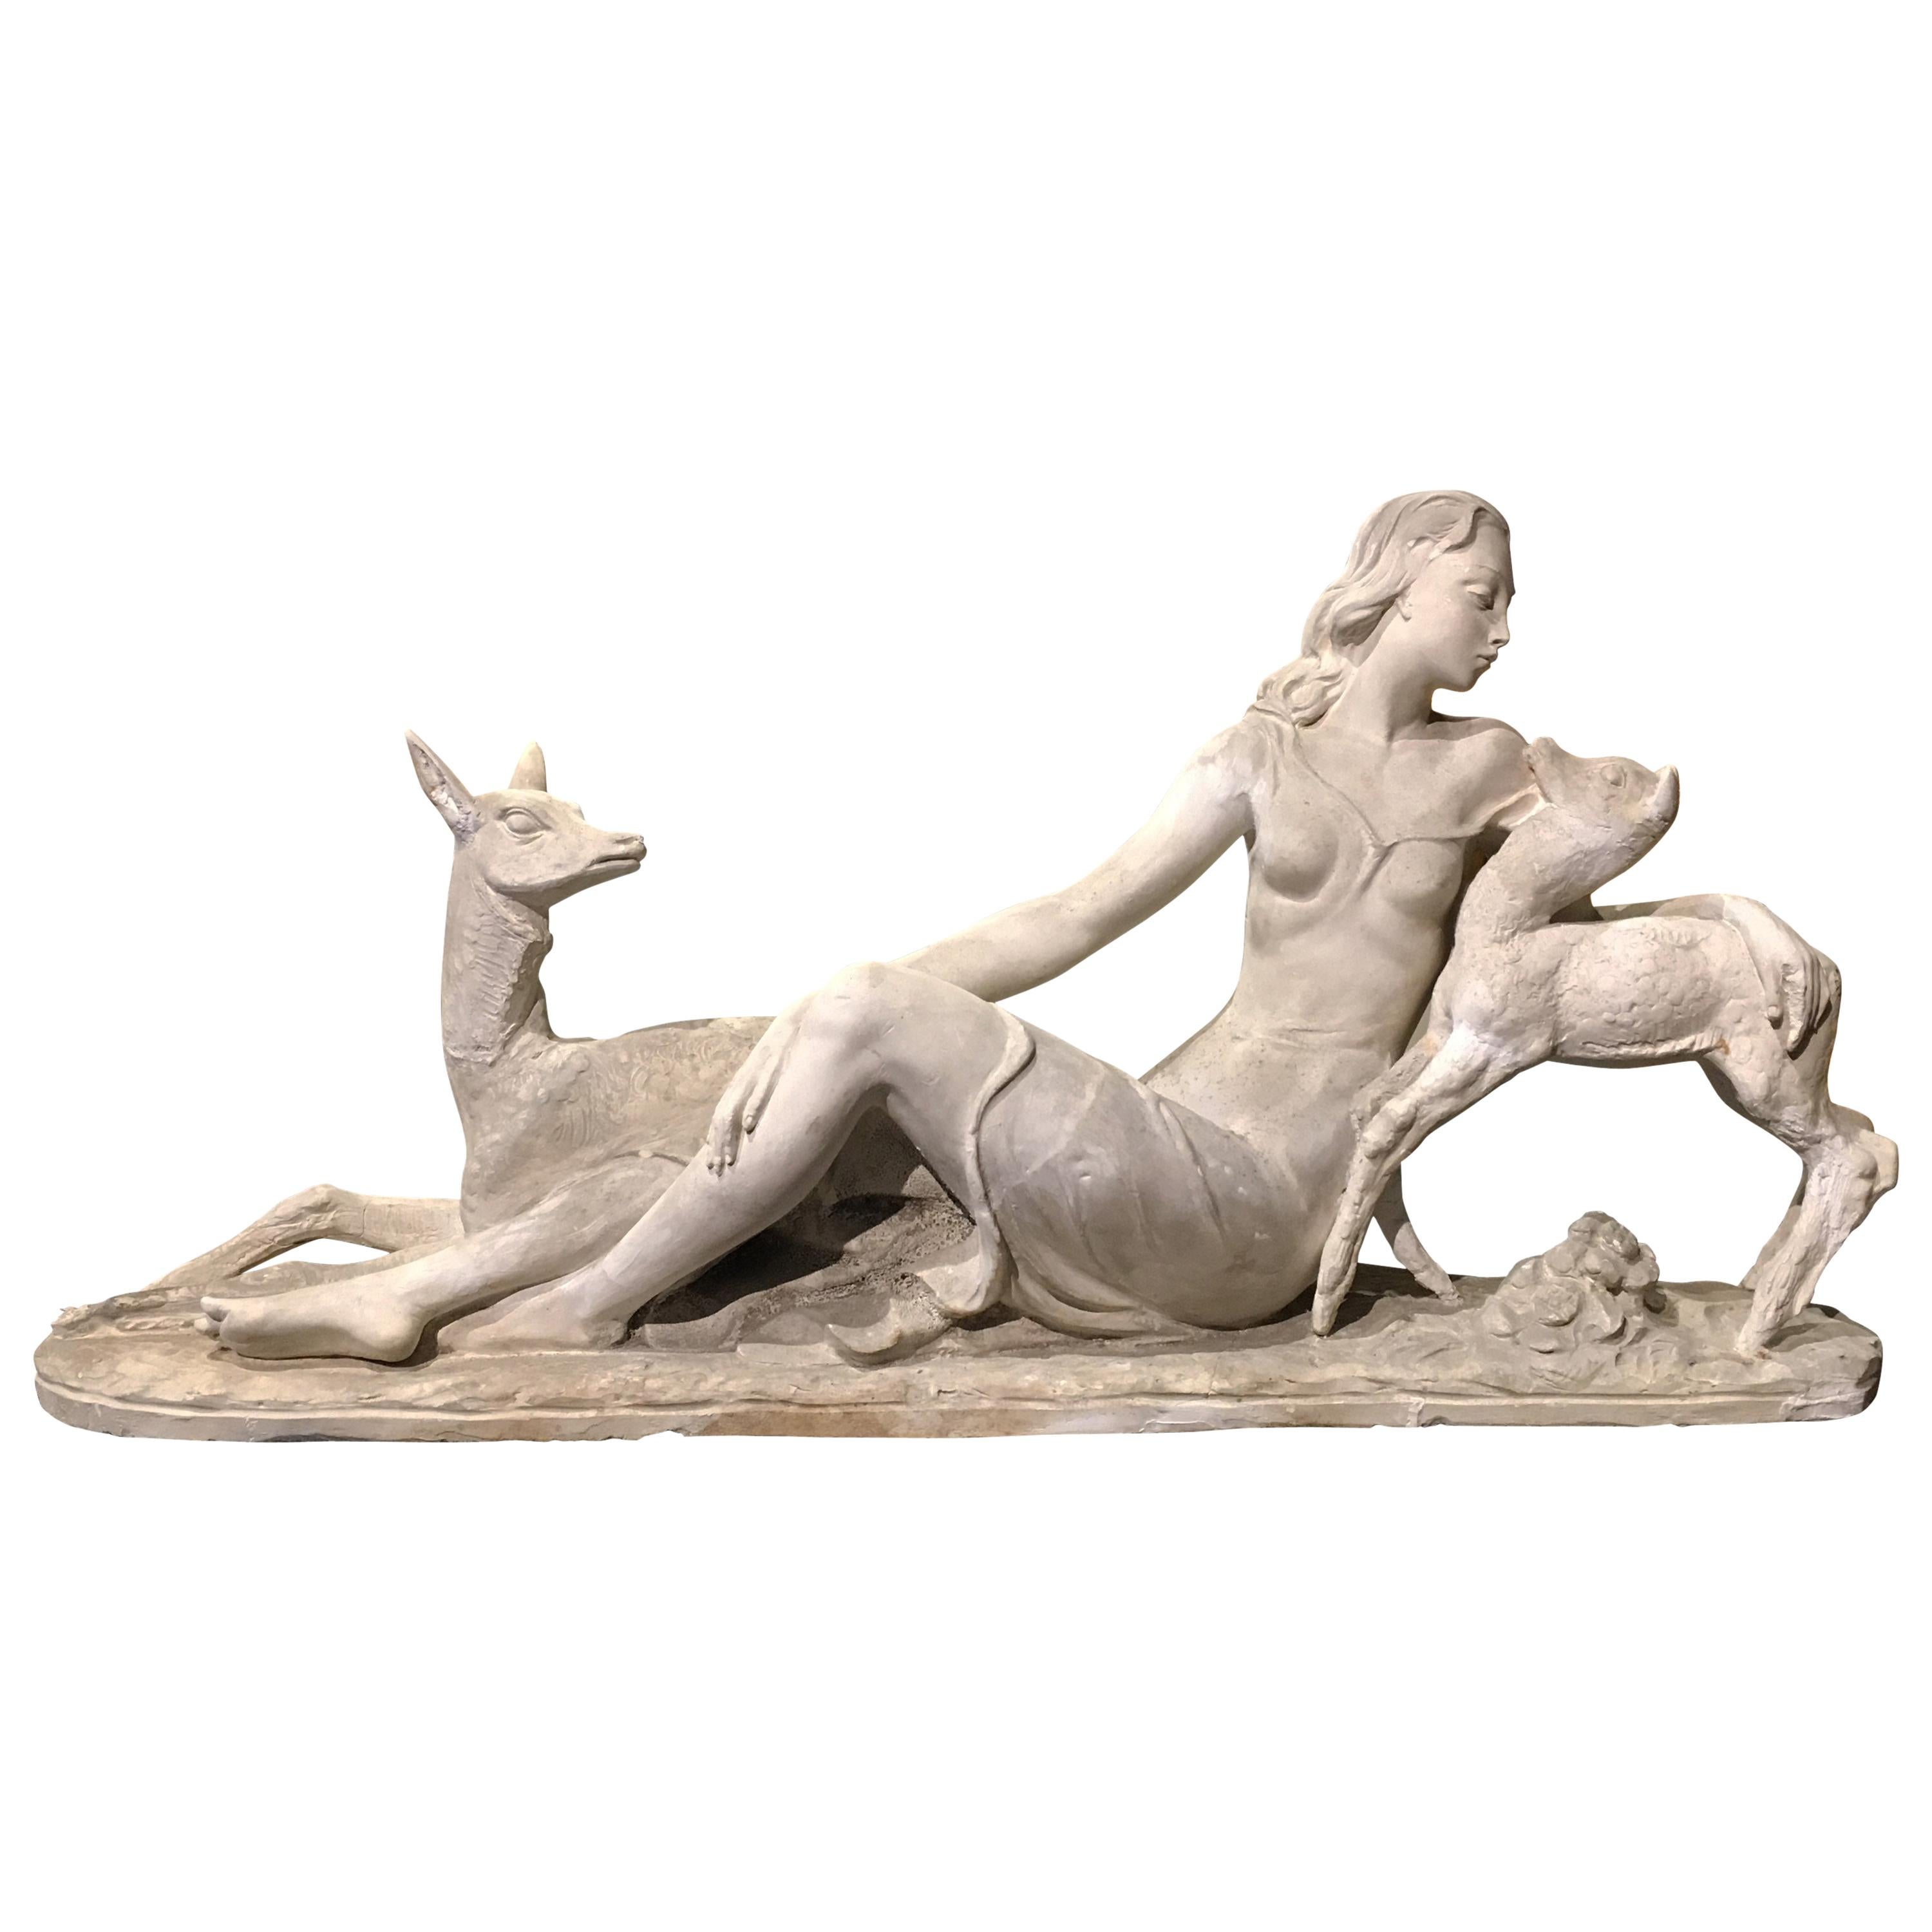 Early 20th Century Italian Art Deco Plaster Sculpture by Mario Bandini For Sale